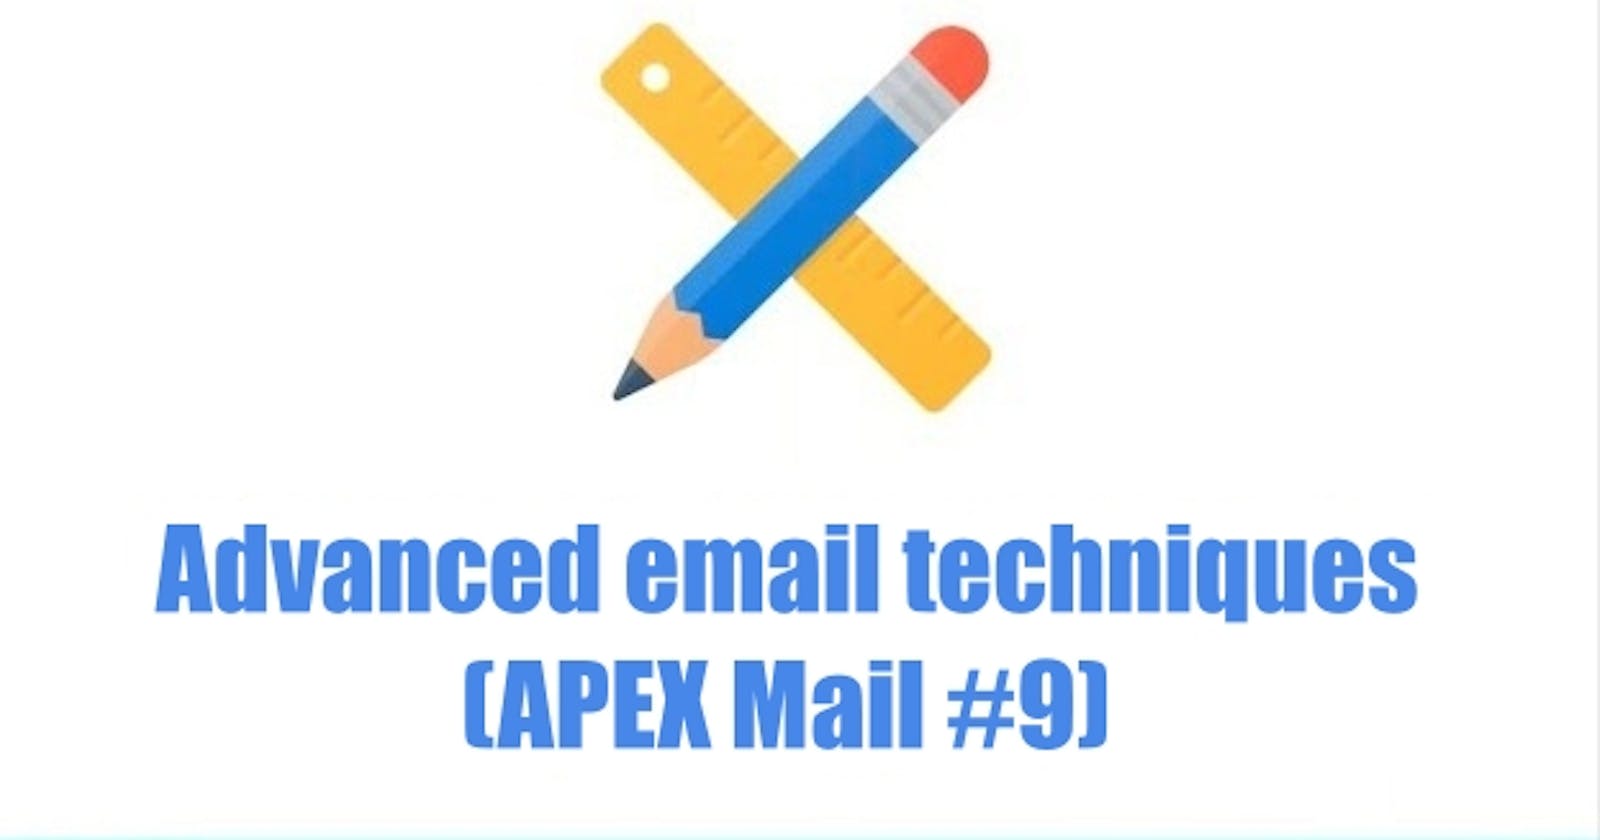 Advanced email techniques (APEX Mail #9)